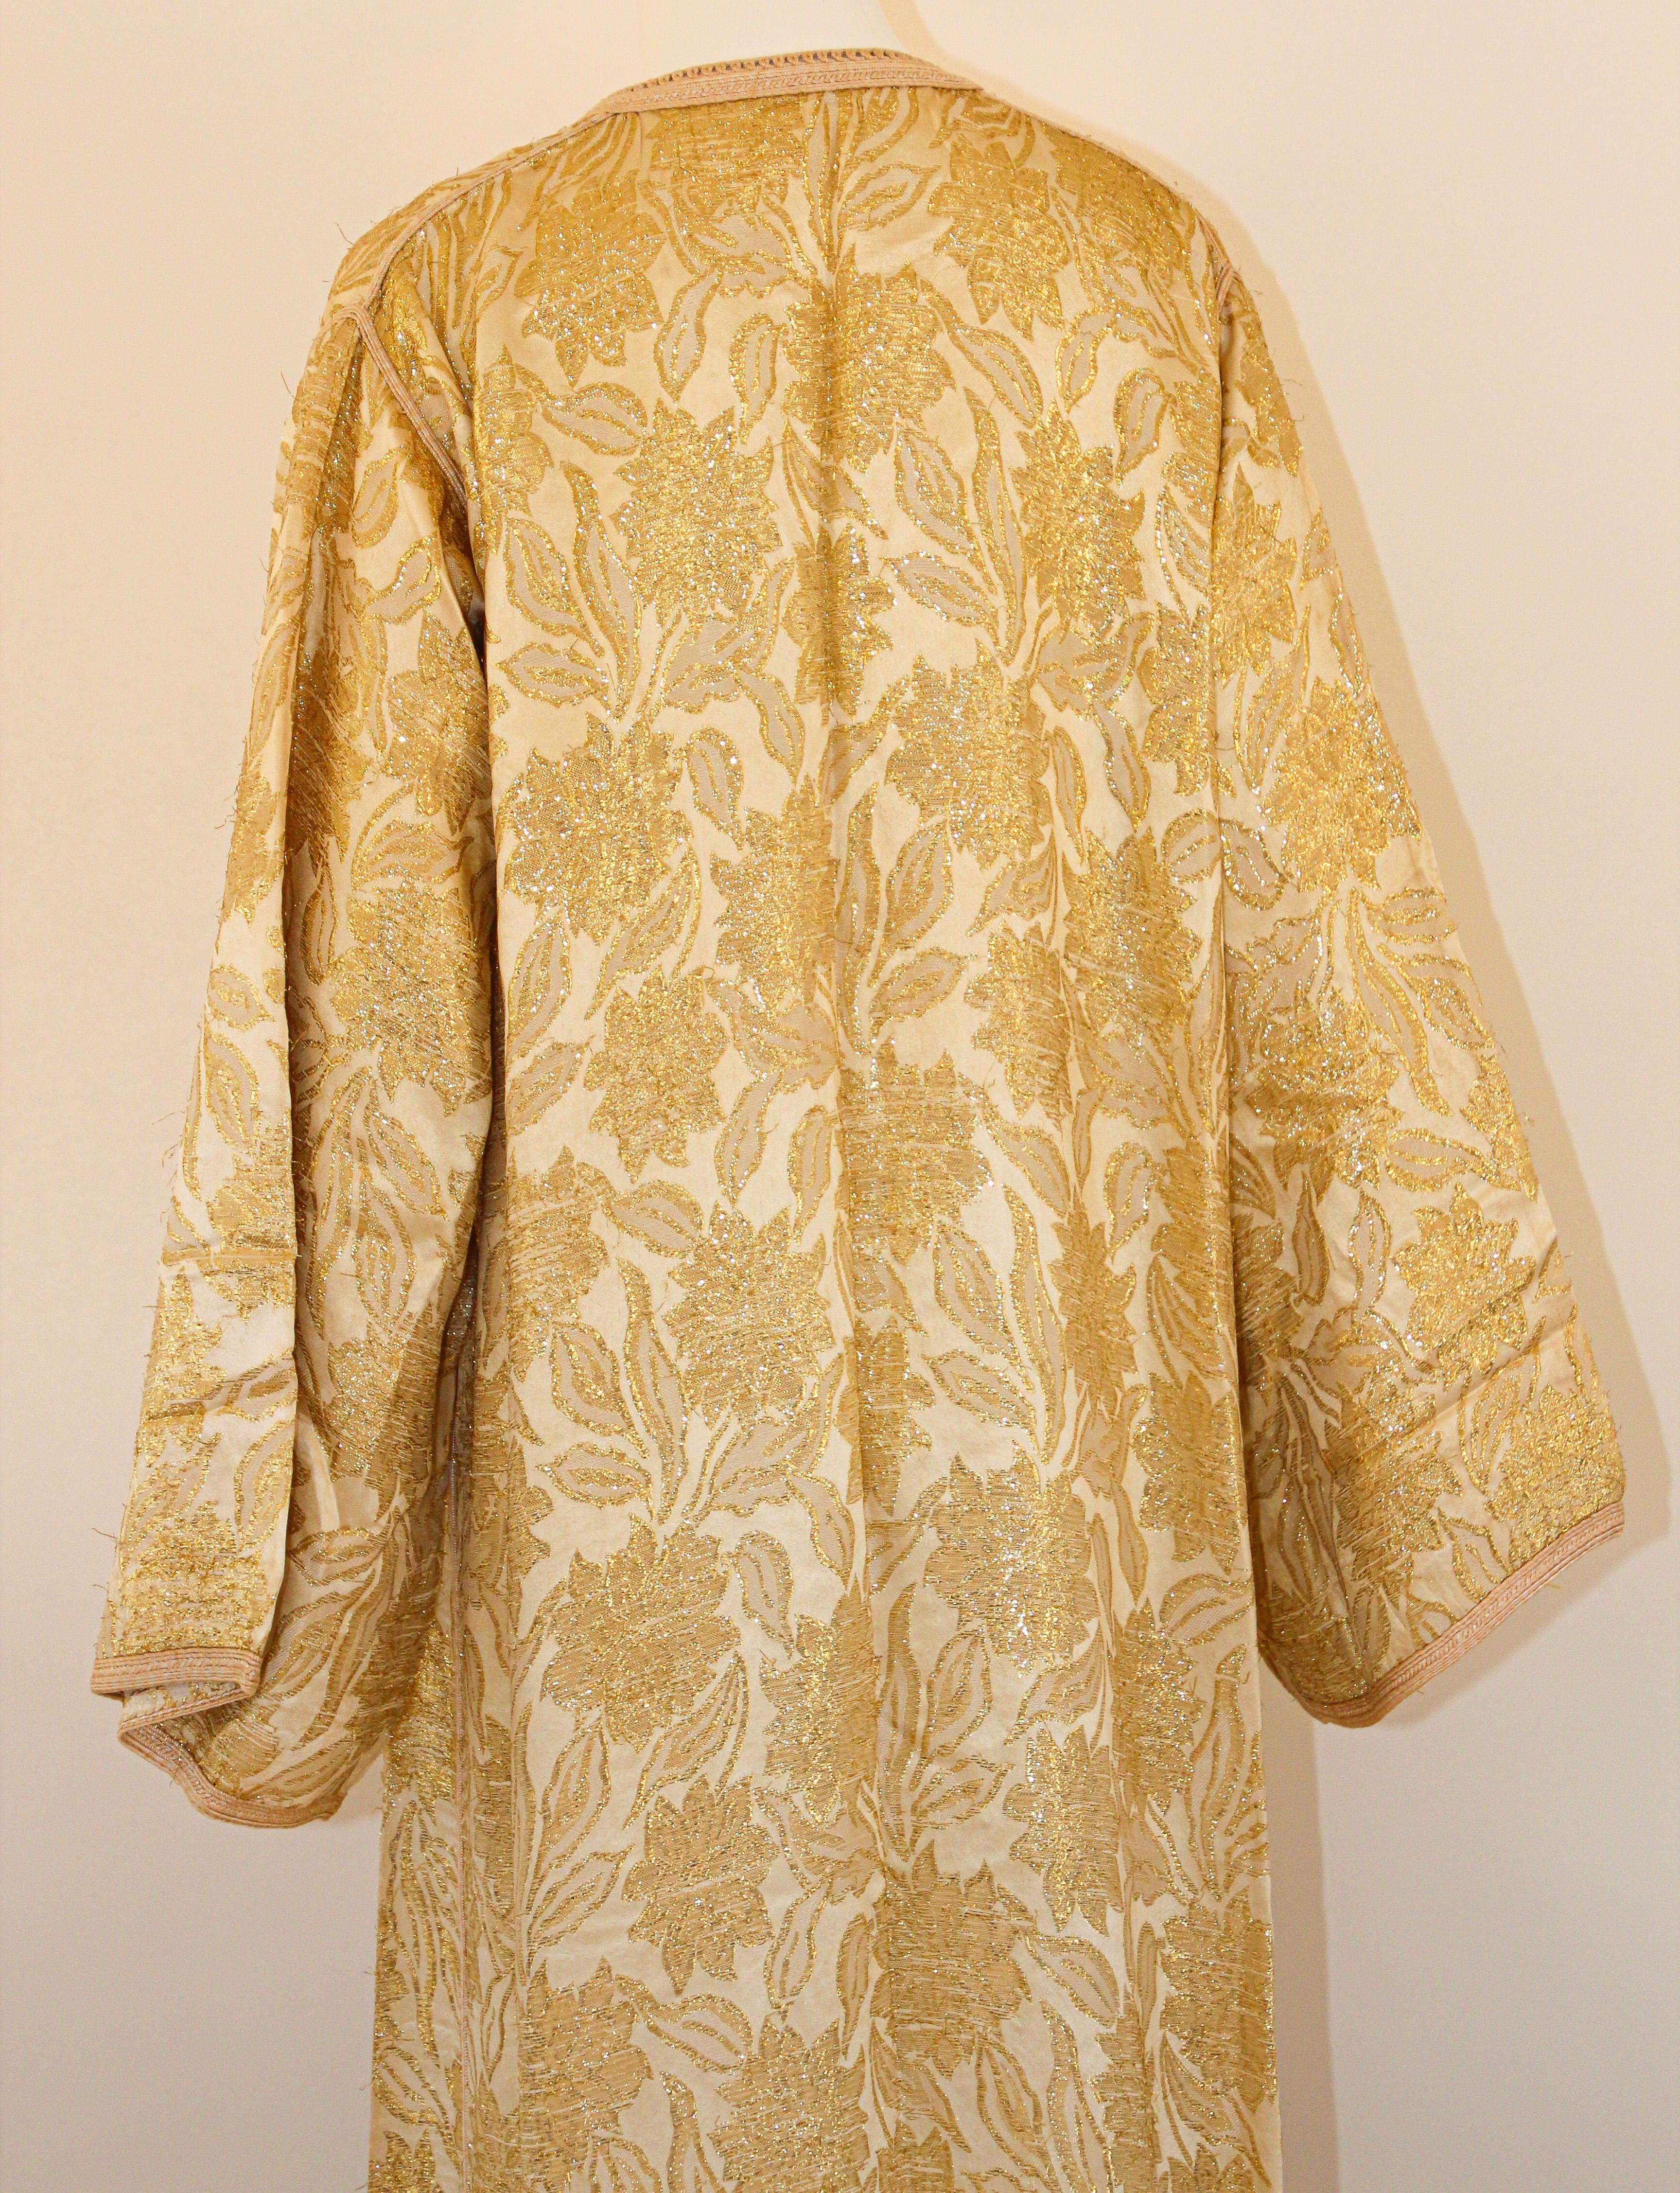 1940s Moroccan Antique Caftan Gold Damask Embroidered Caftan Maxi Dress For Sale 11